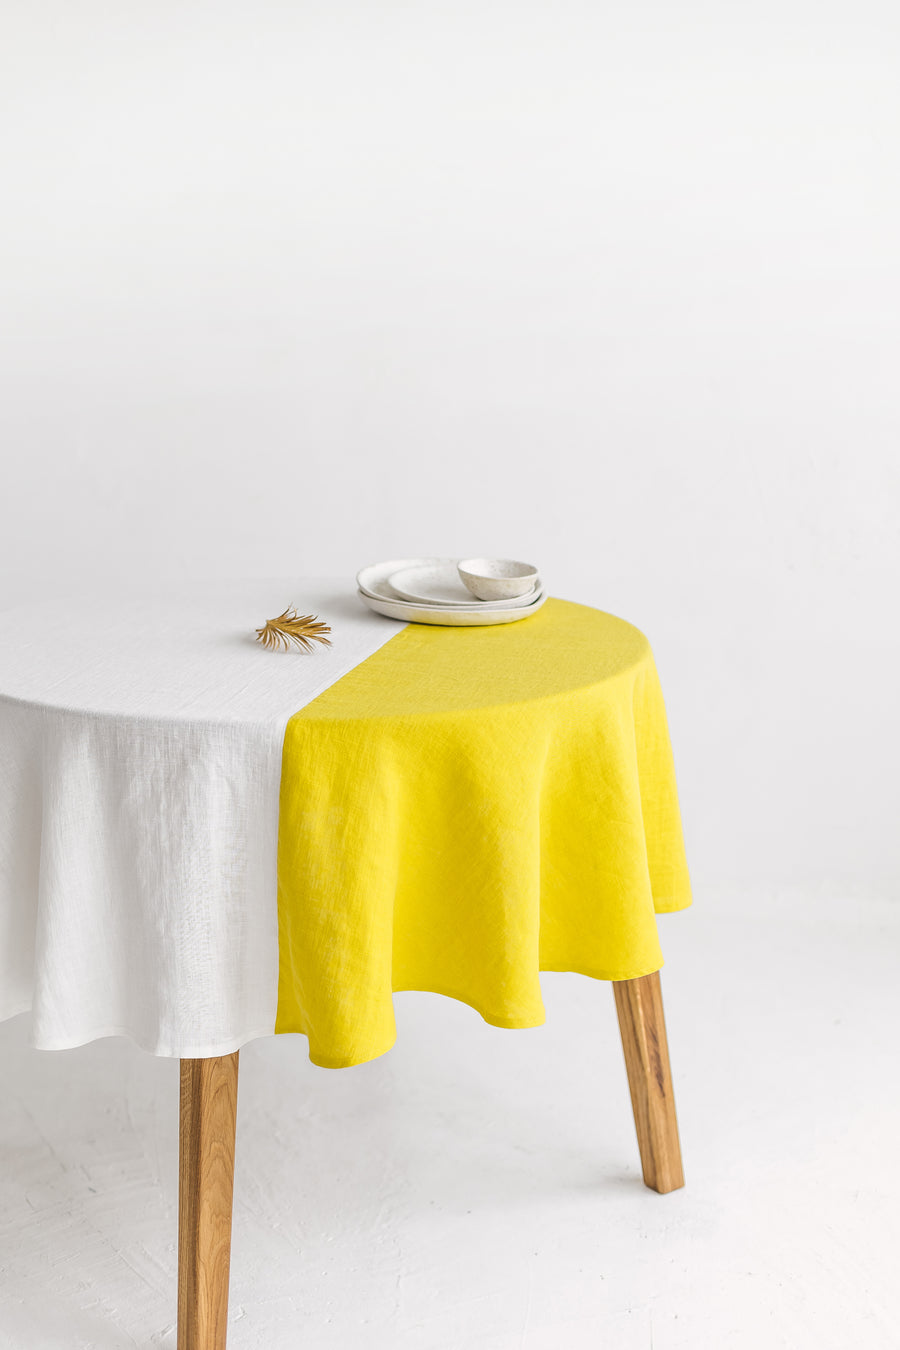 Color Block Round Rusty Linen Tablecloth